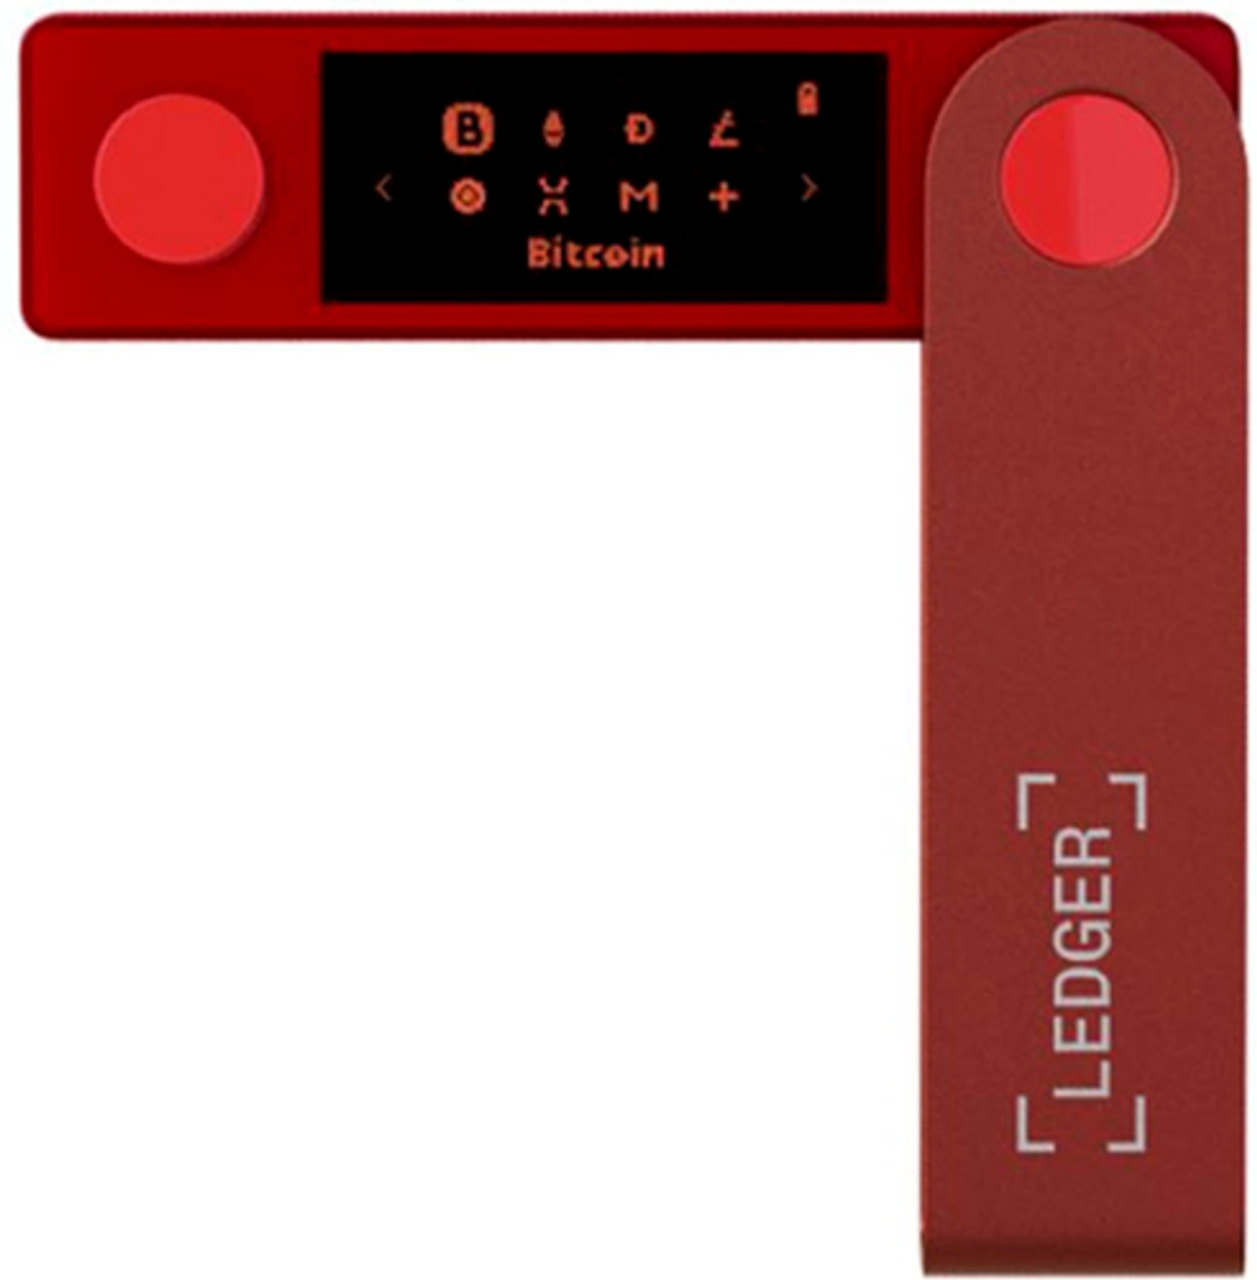 Ledger - Nano X Crypto Hardware Wallet - Bluetooth - Ruby Red